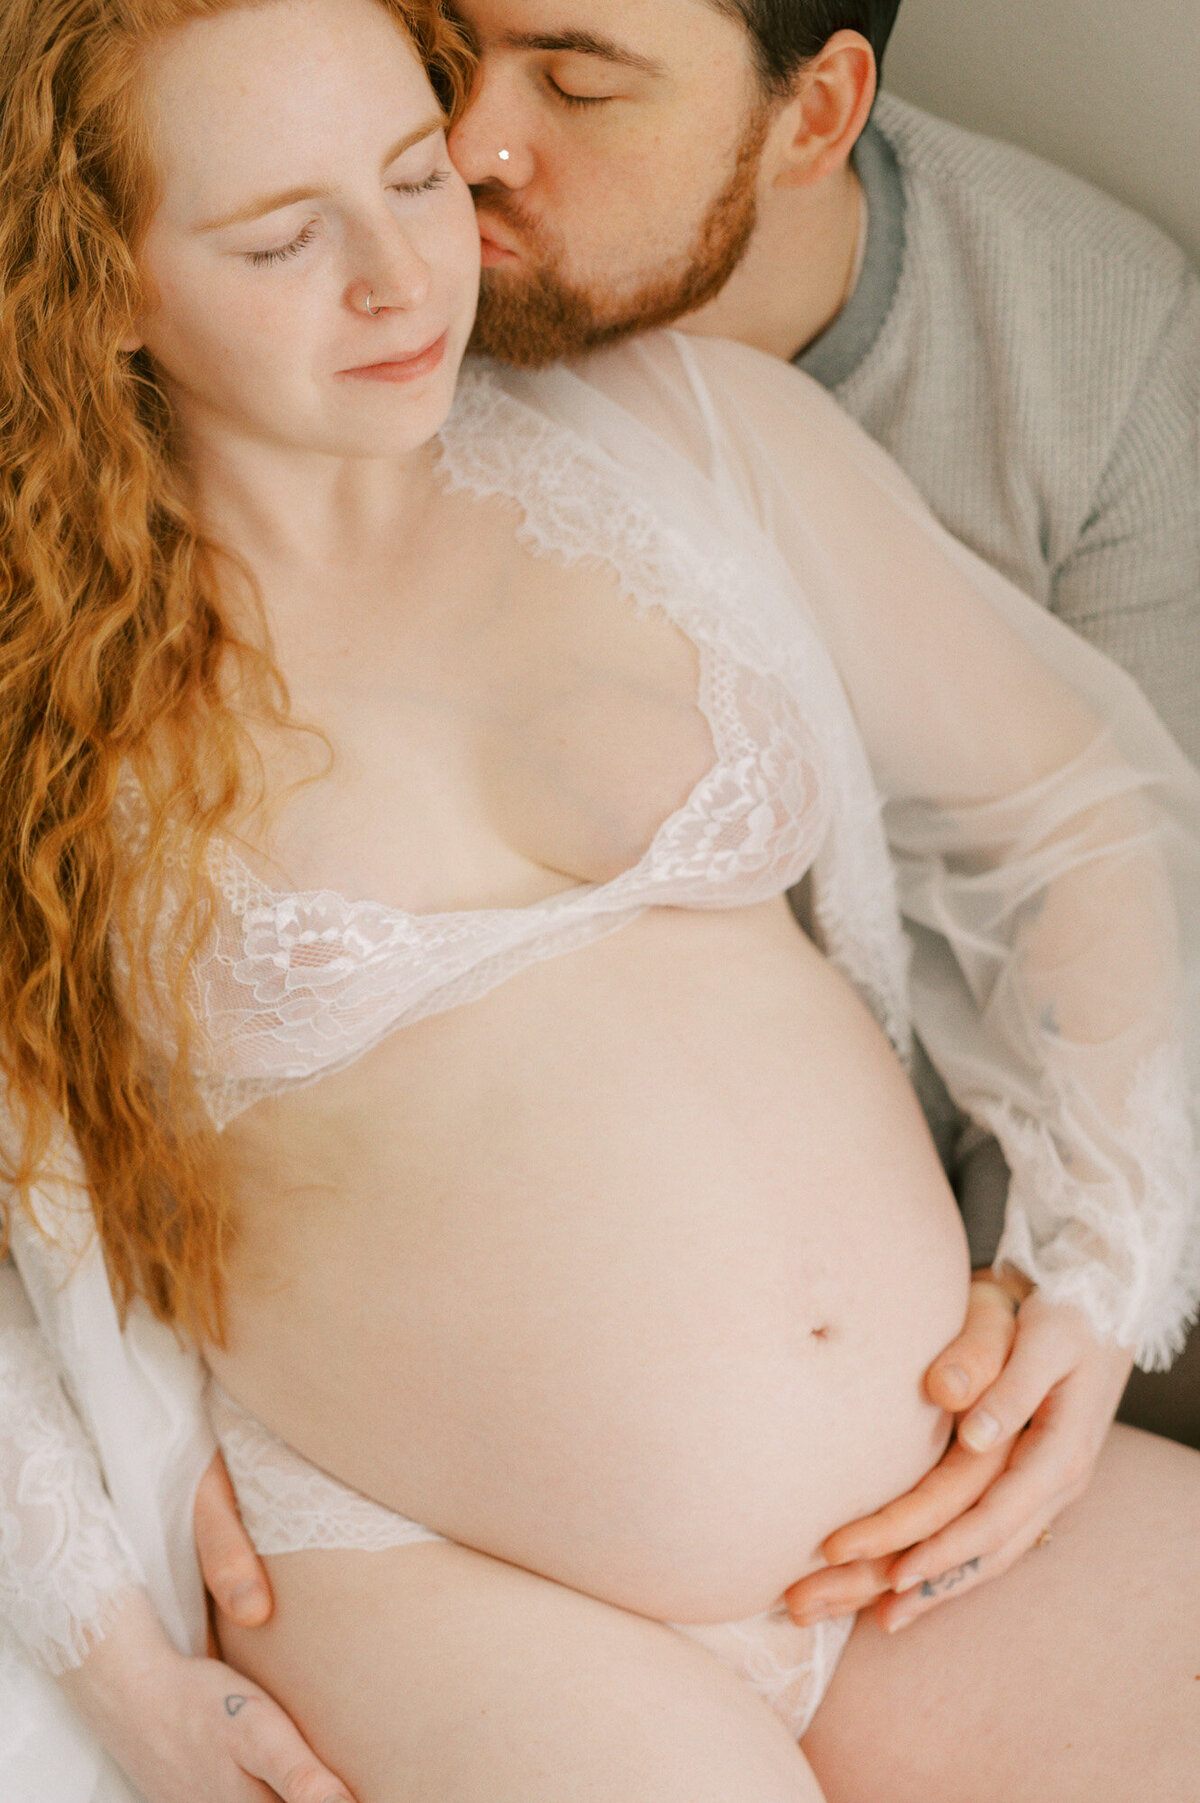 intimate-maternity-boudoir-session-23